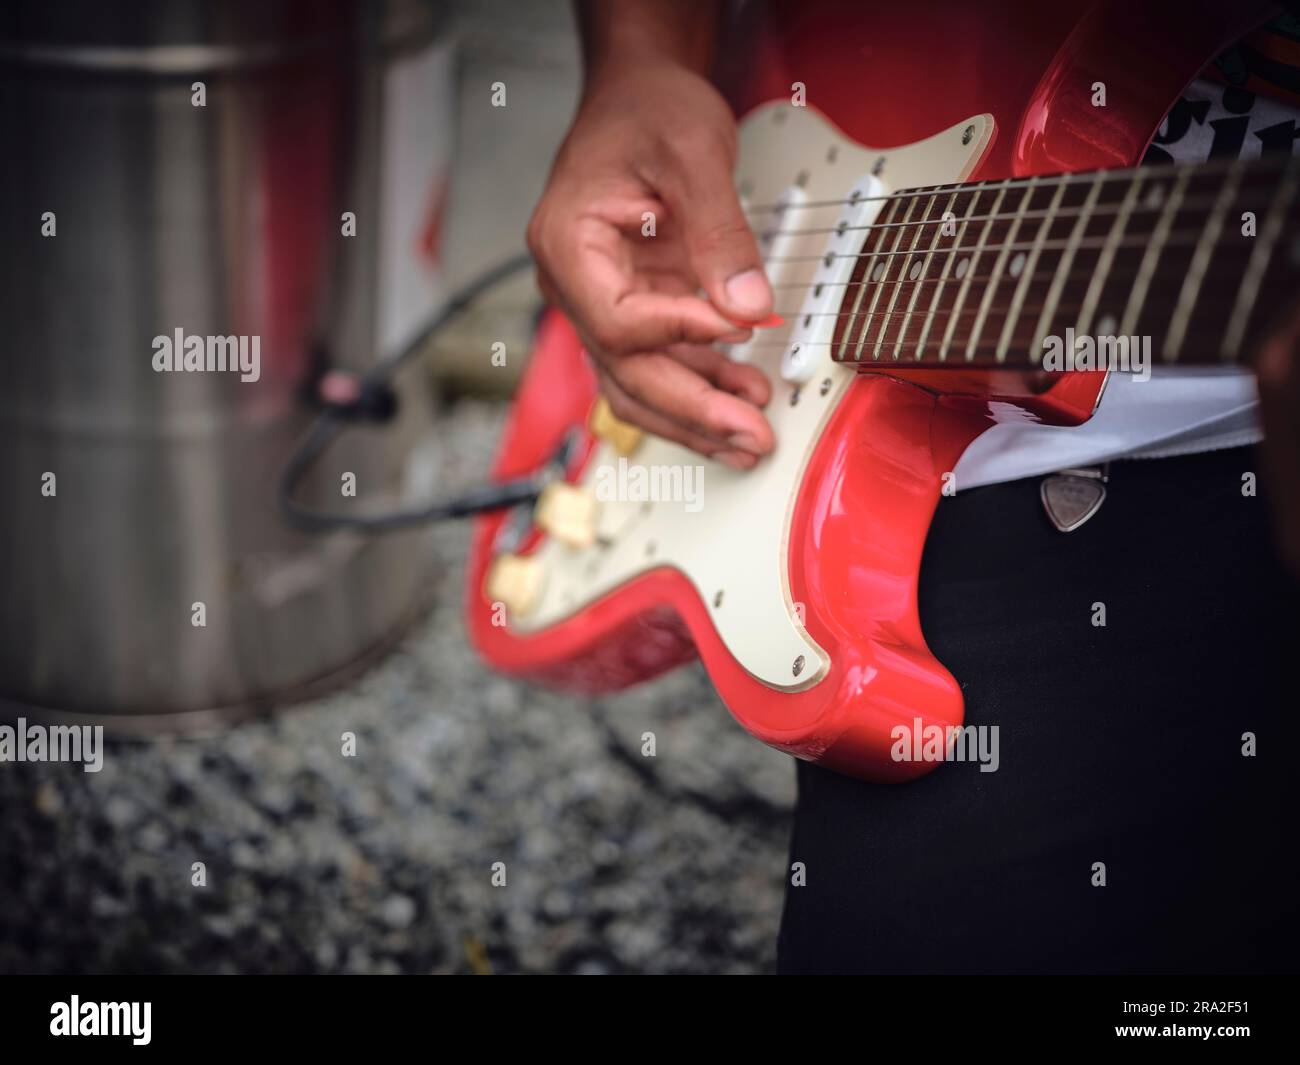 THE man indoors tuning guitar, front view and copy space. Stock Photo